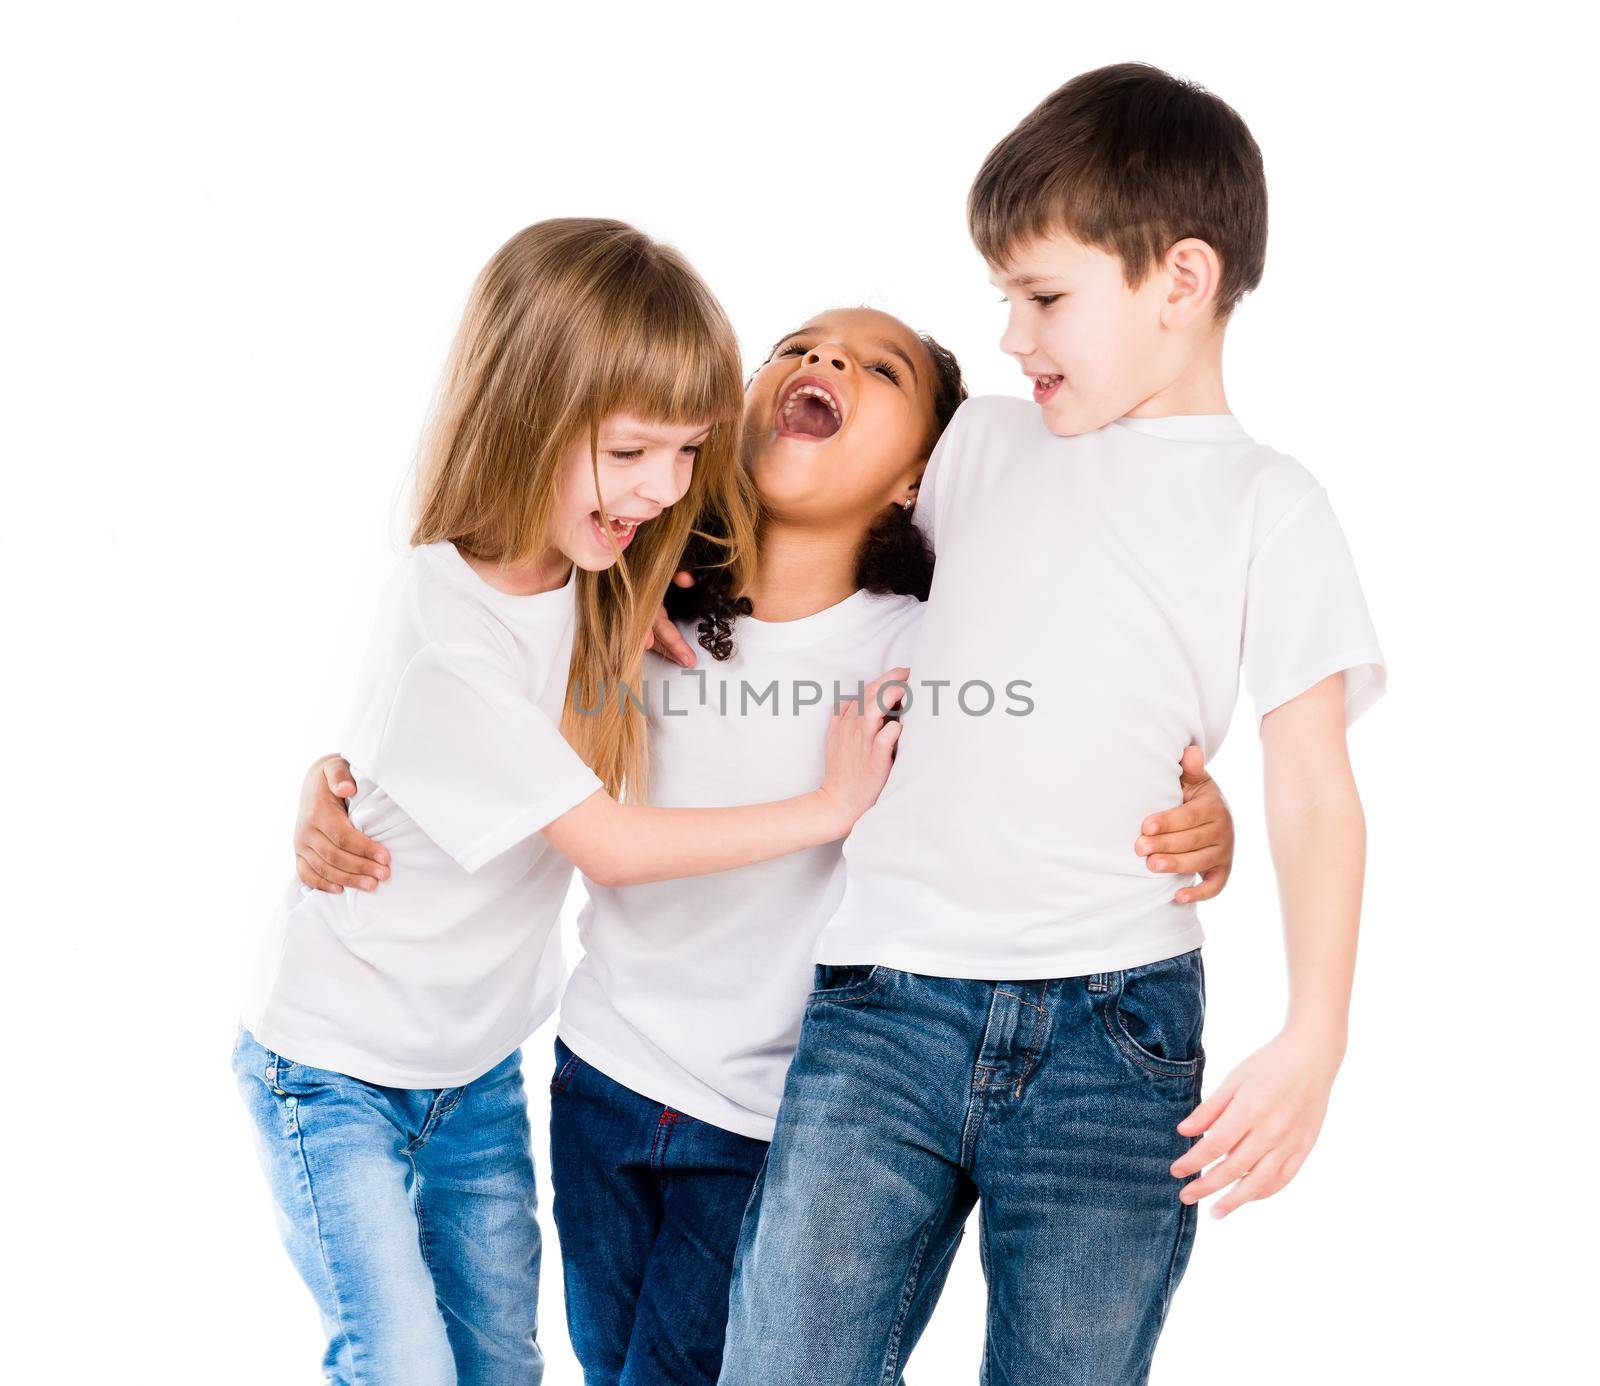 three trendy children with different complexion laugh embracing each other isolated on white background